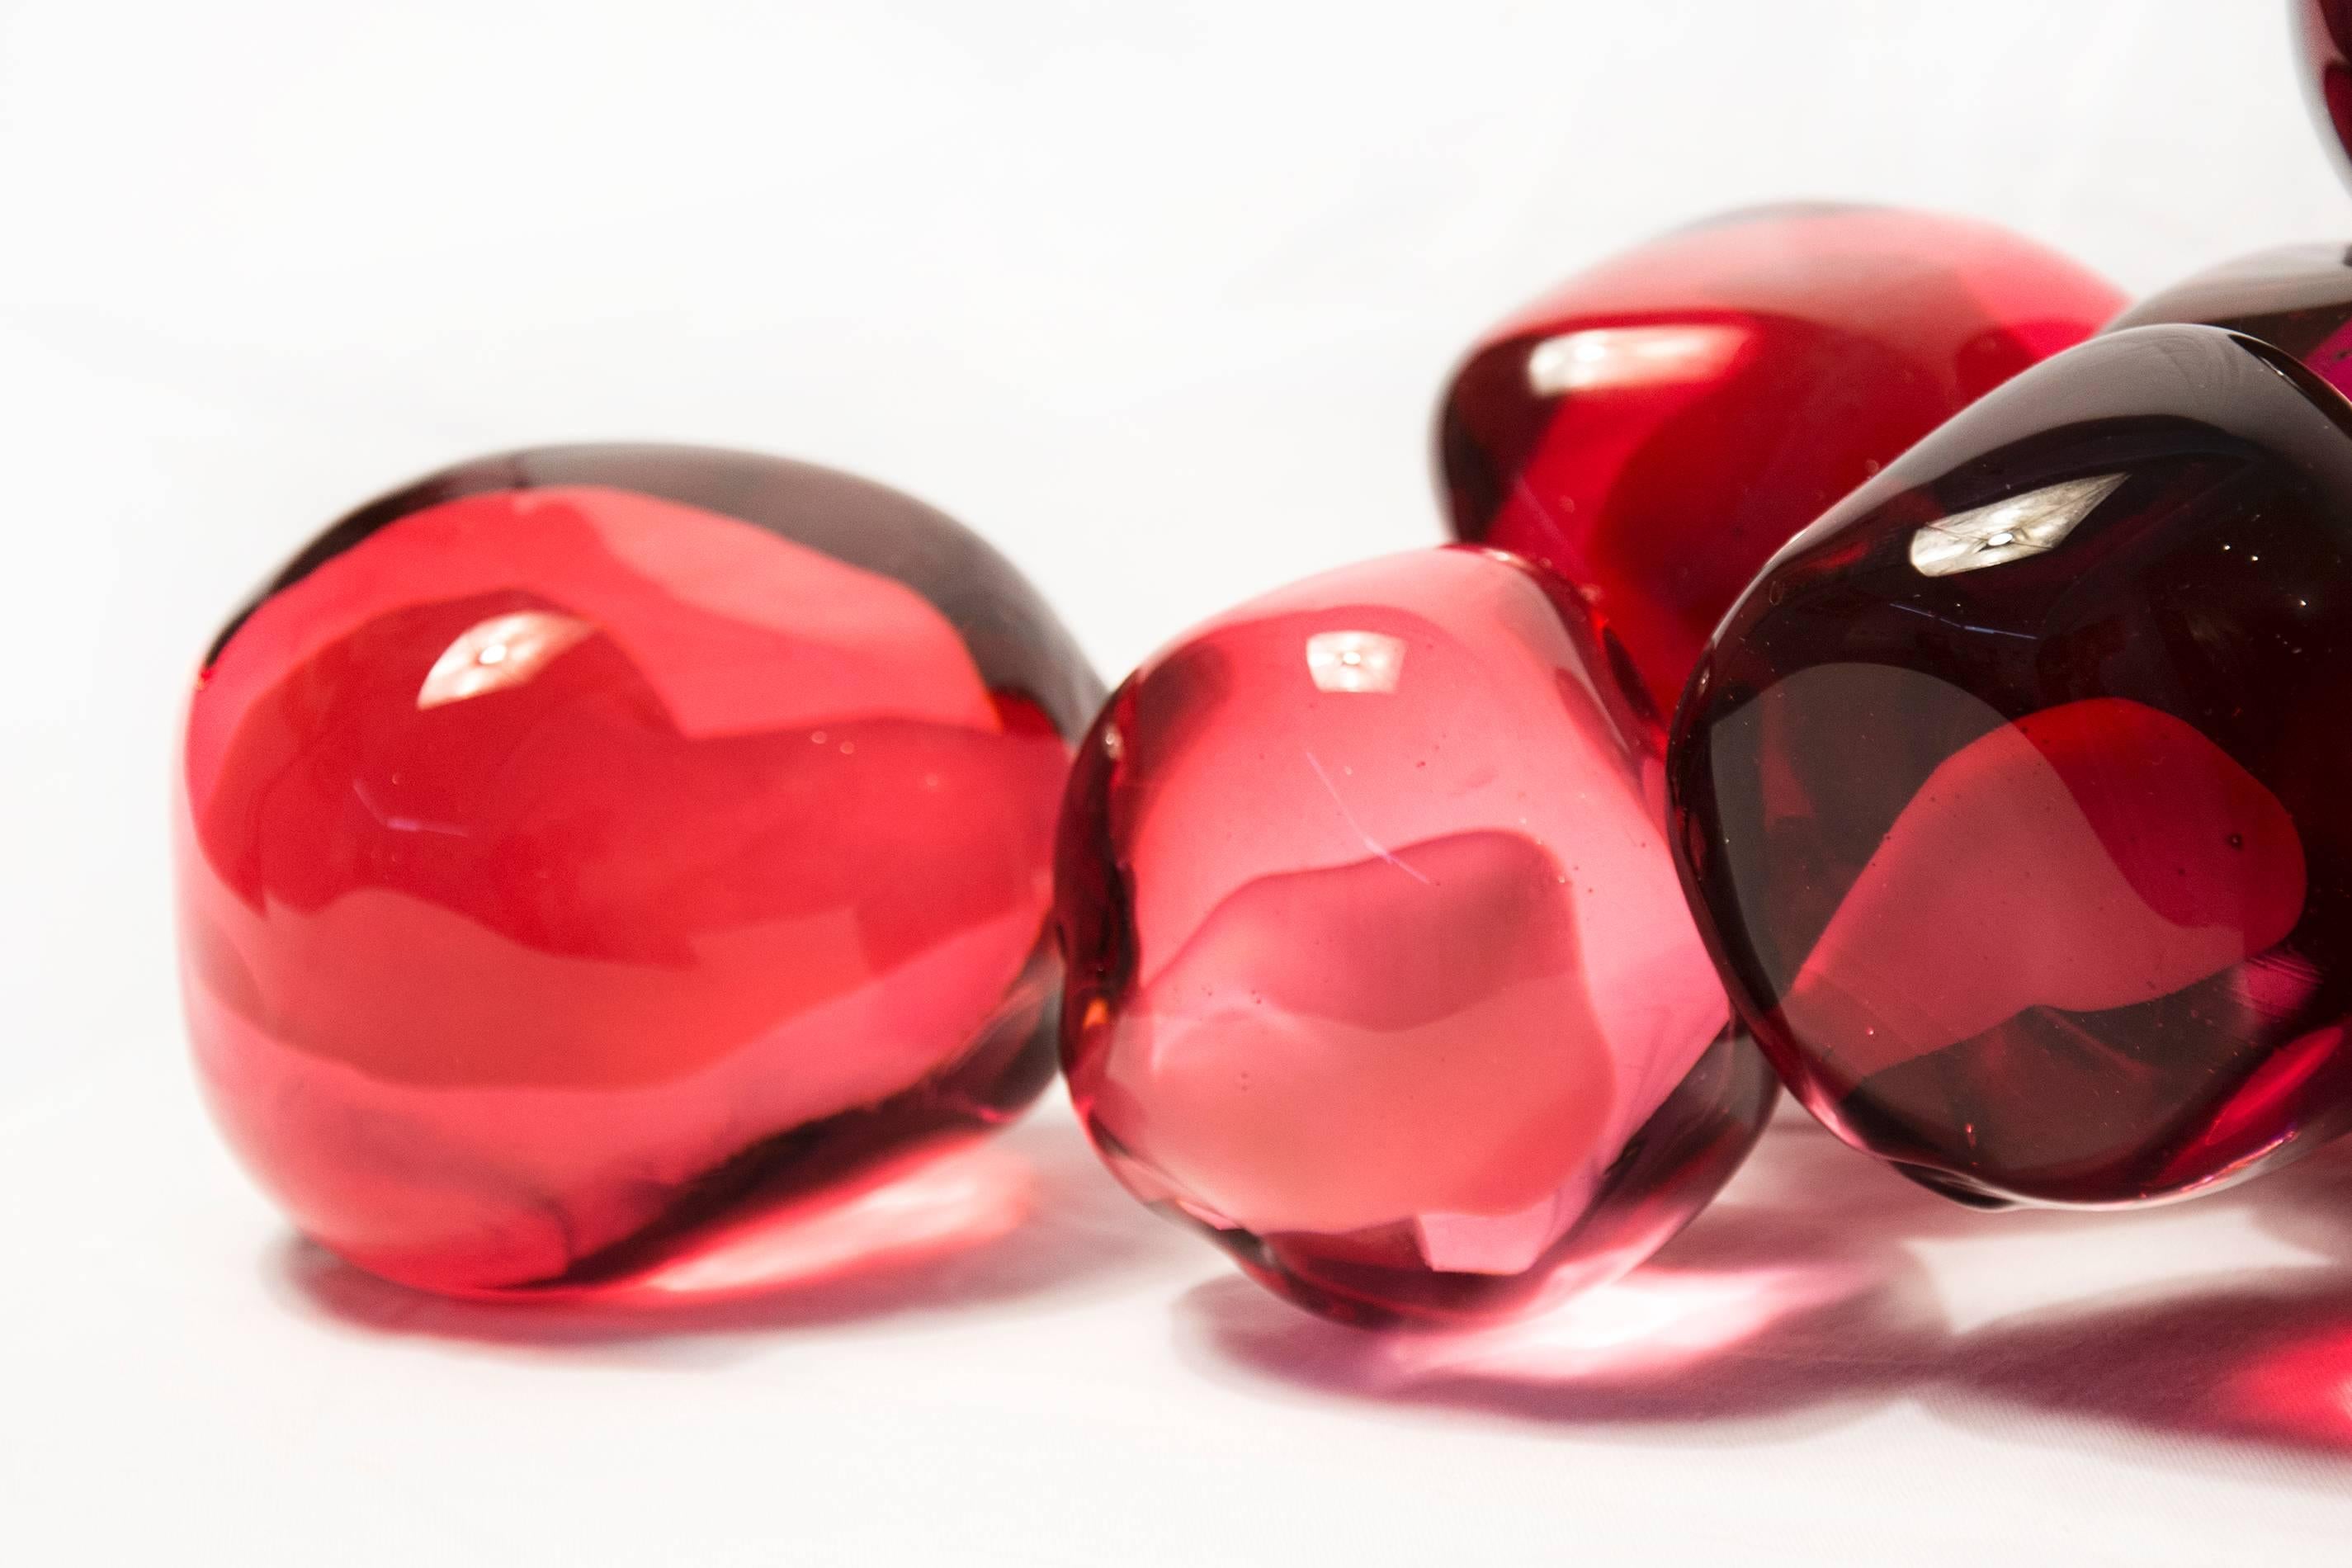 Clustered and sensuous oblong forms in translucent red glass have a smooth polished surface like the fruit that surrounds pomegranate seeds. A single seed sits next to the cluster. The pomegranate represents abundance, fortune and fertility. 

